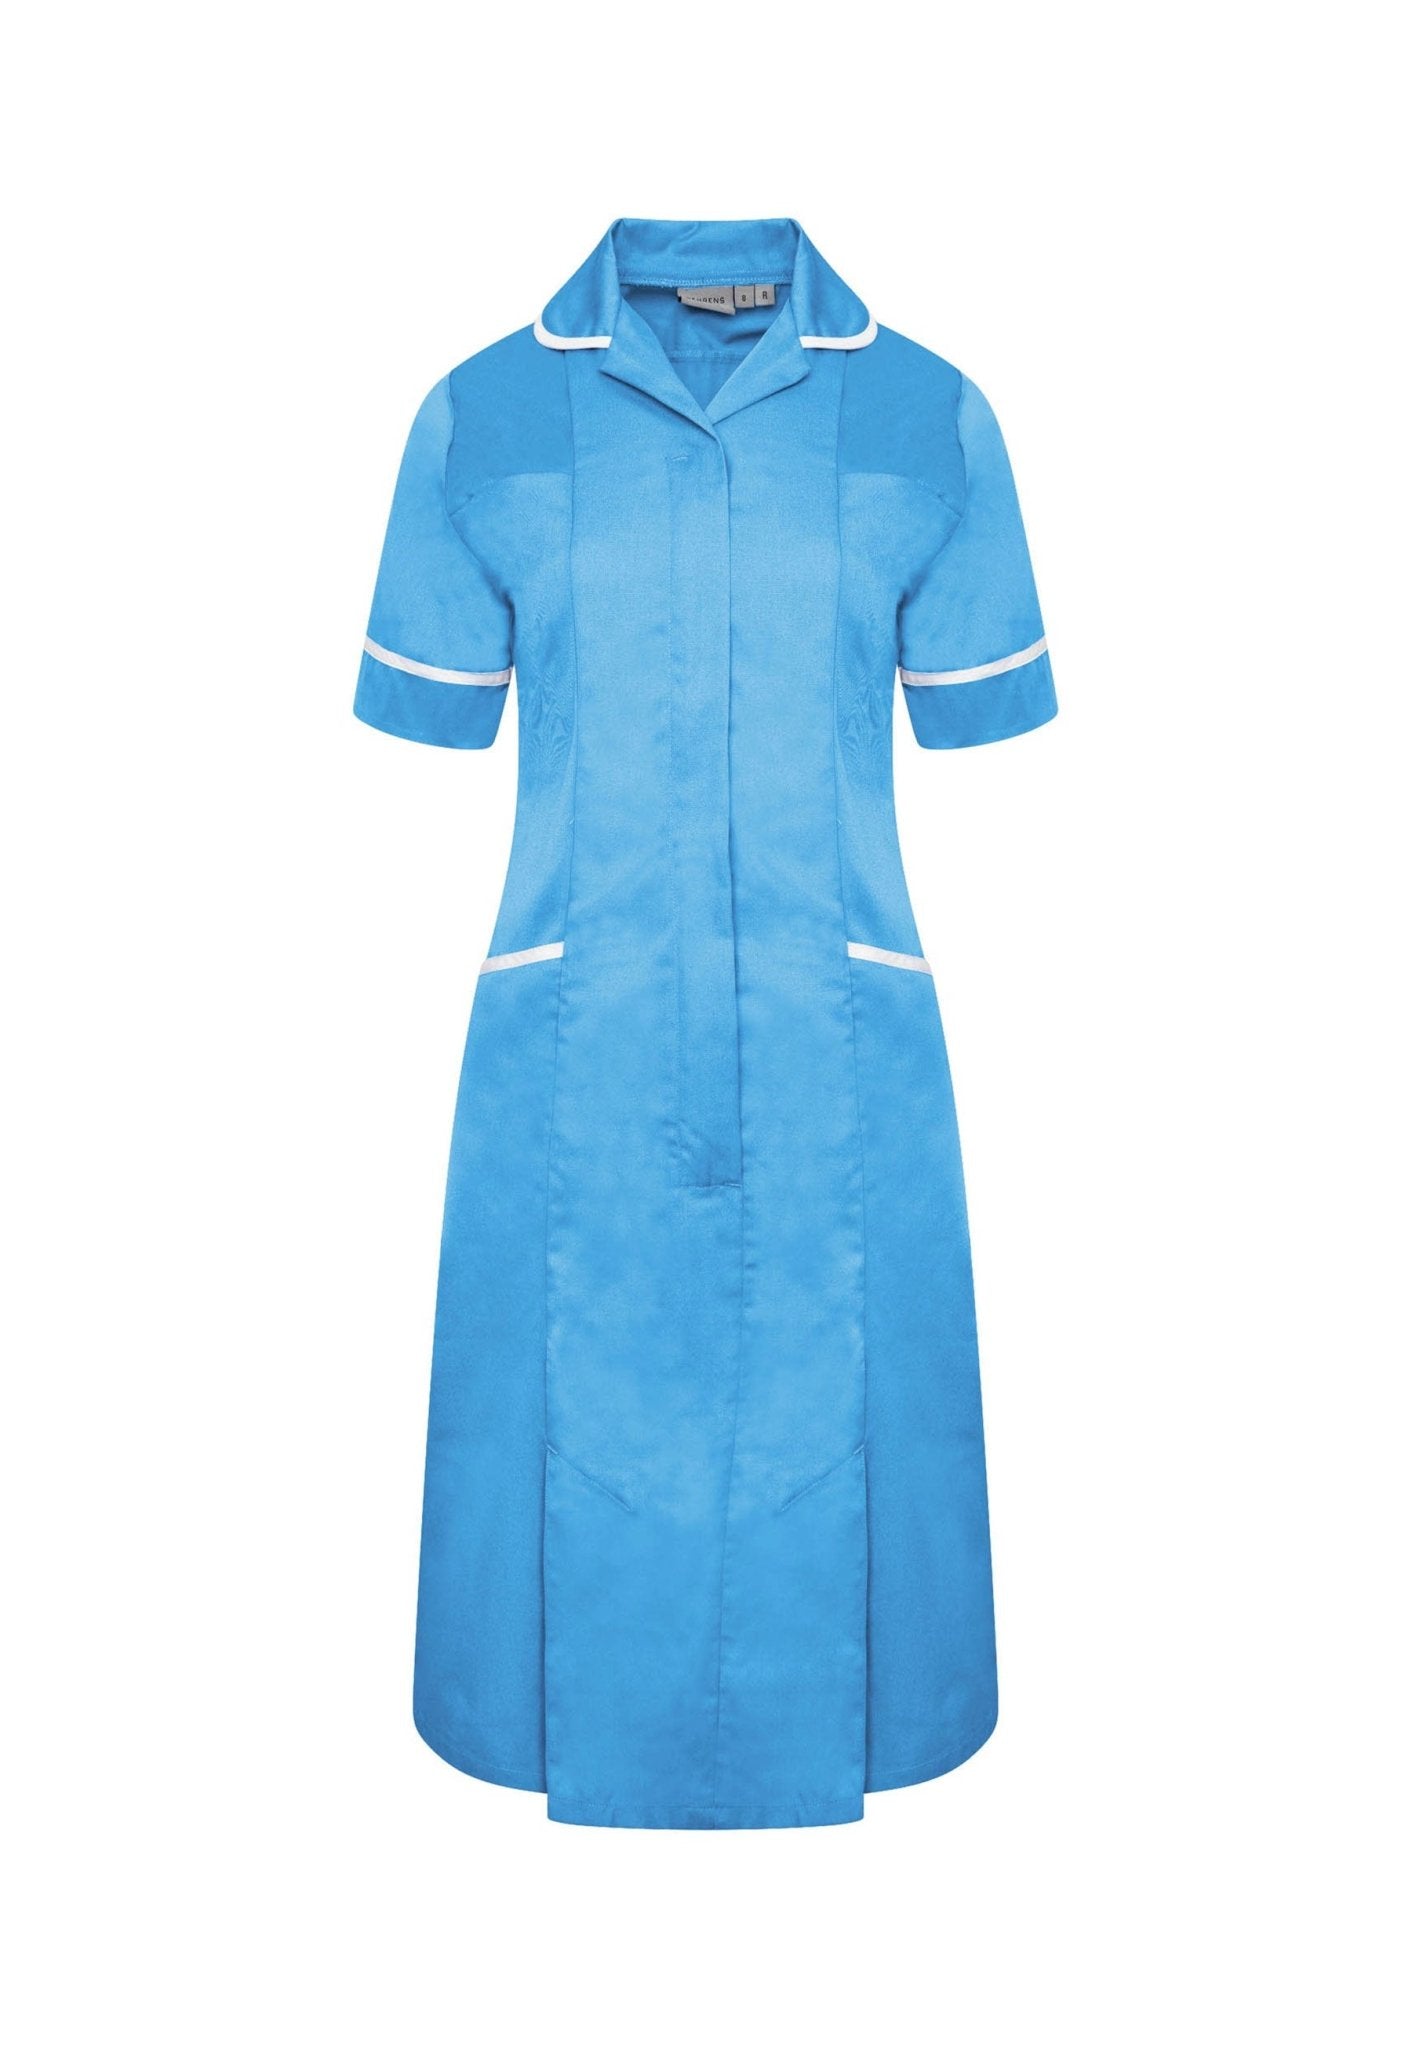 A Universal Code: Nurse Uniforms of All Nations – Circulating Now from the  NLM Historical Collections